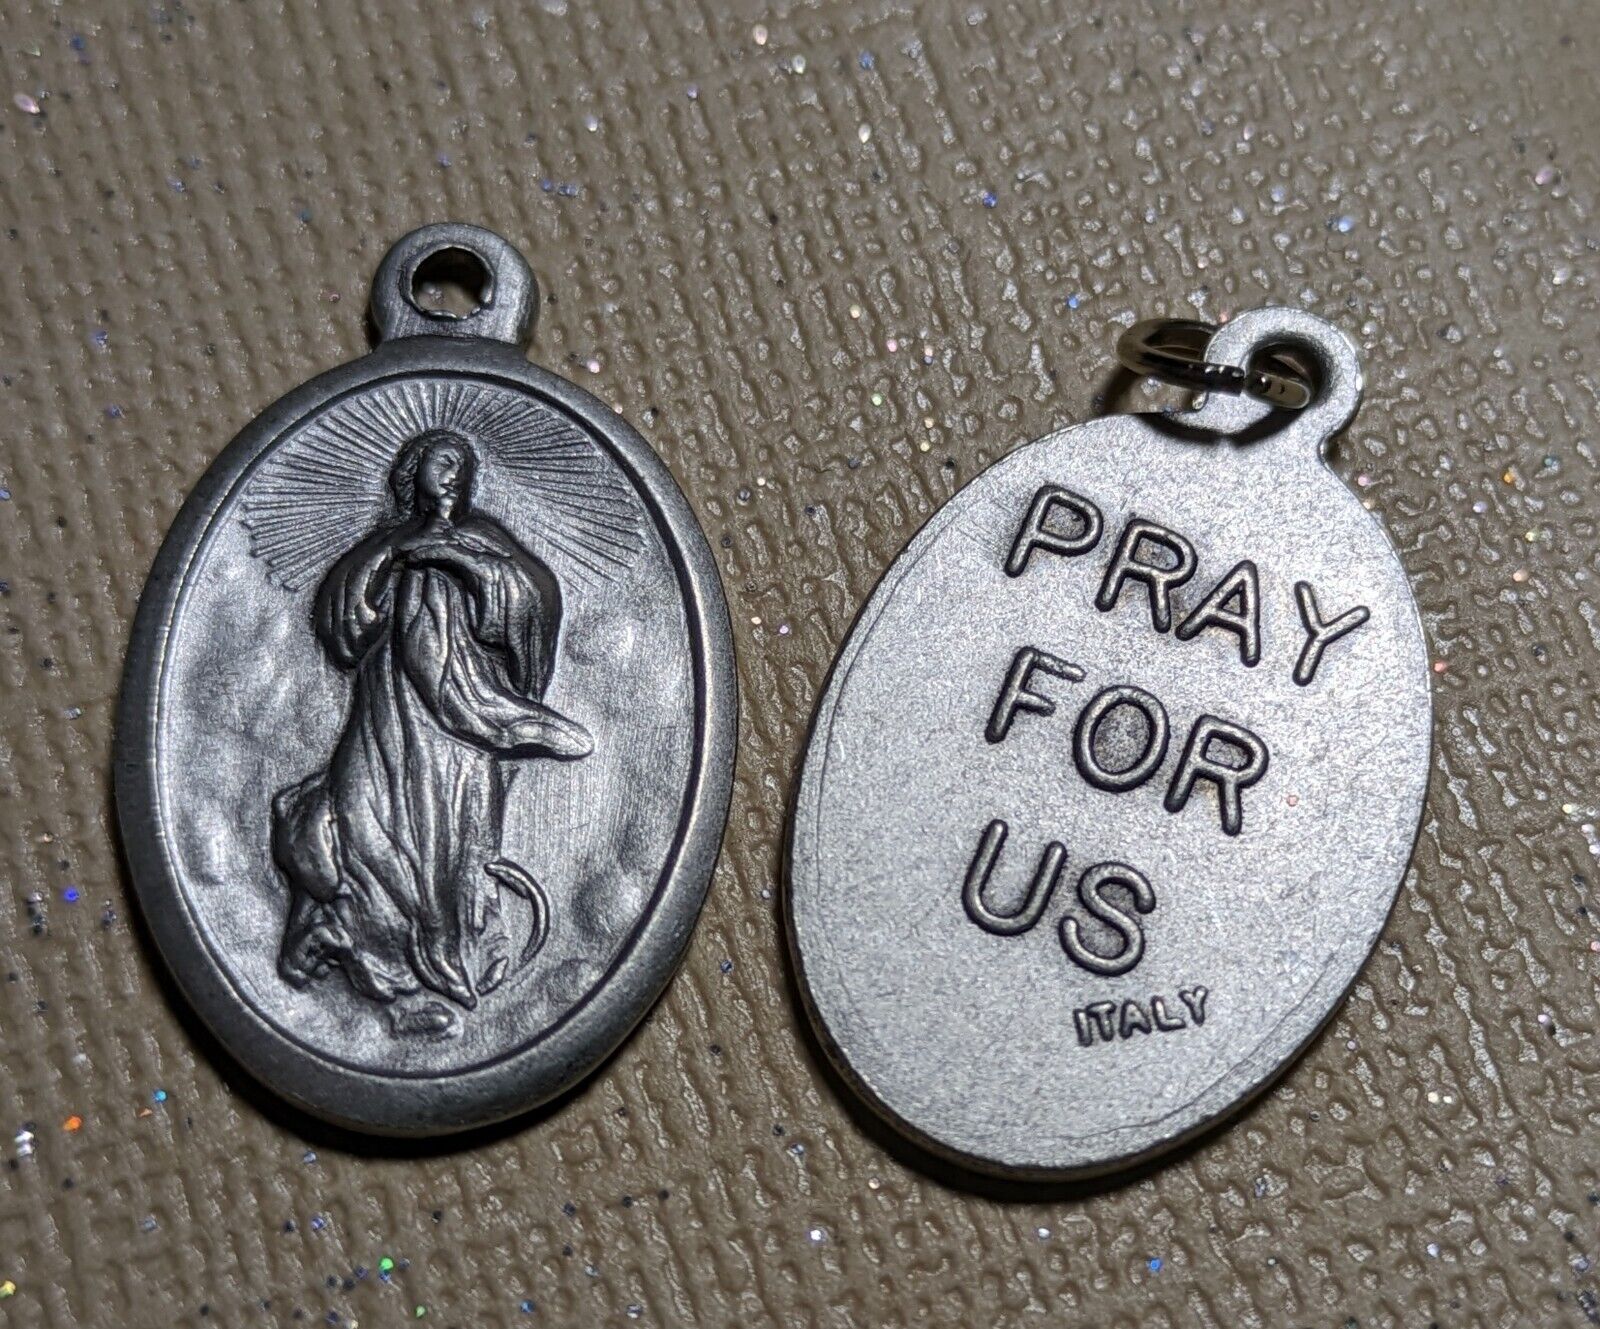 Our Lady of the Assumption religious medal, made in Italy